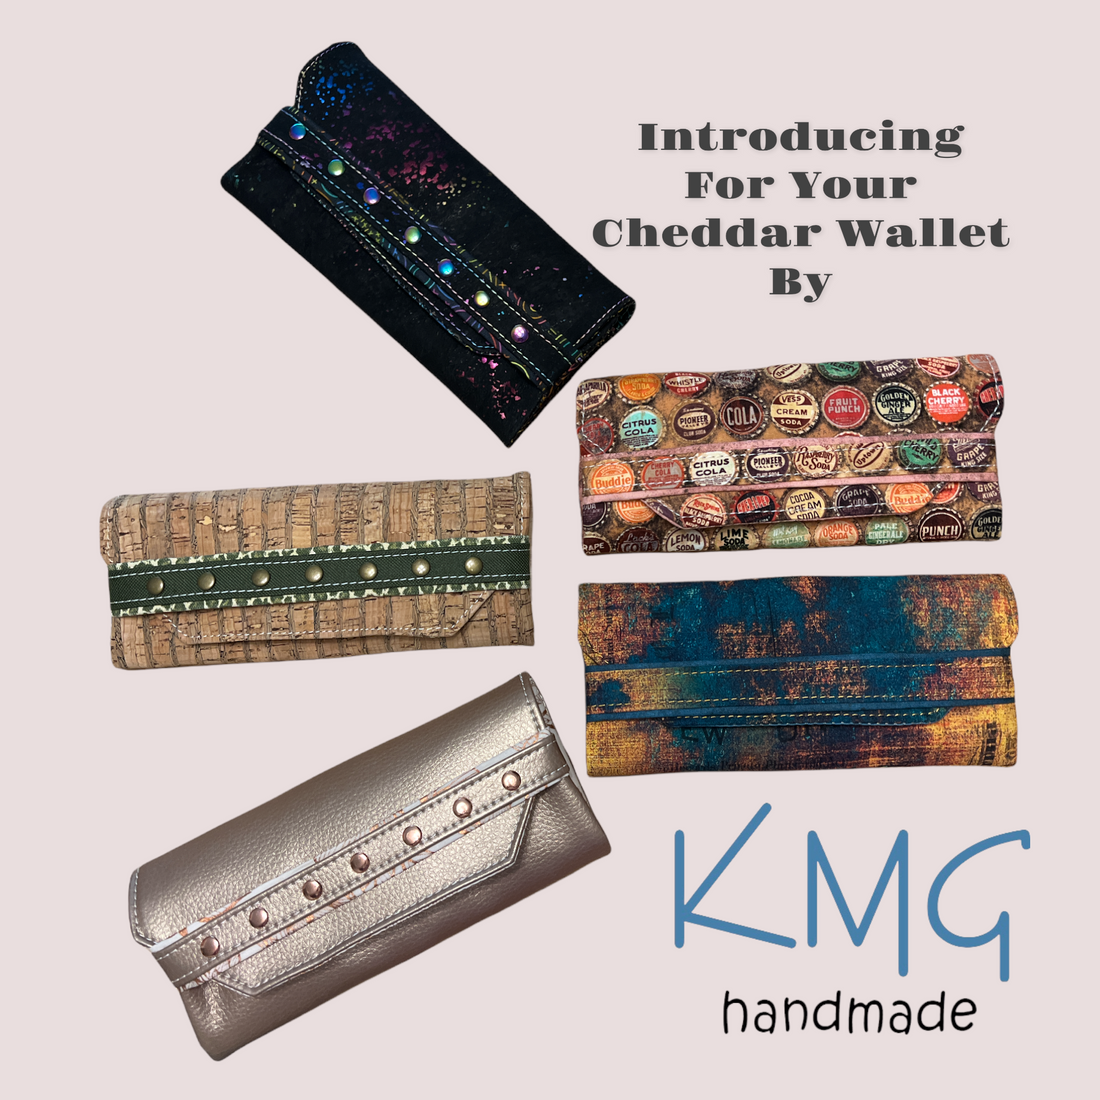 Is it March already?! What's happening at KMGhandmade.